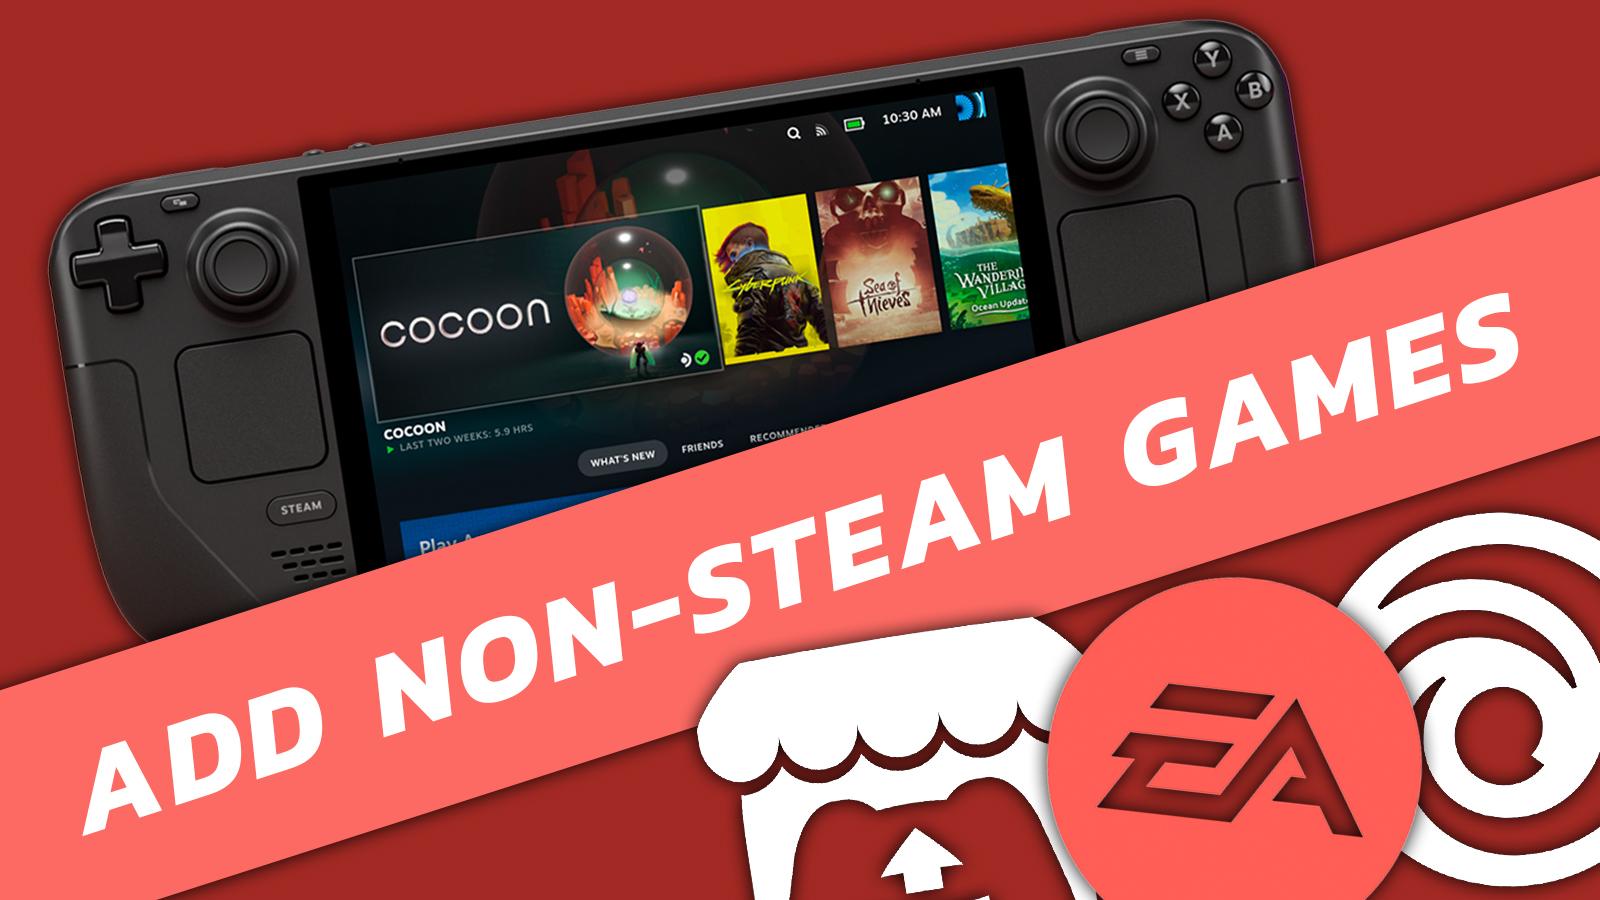 Steam Makes a Big Change to Its Free Games